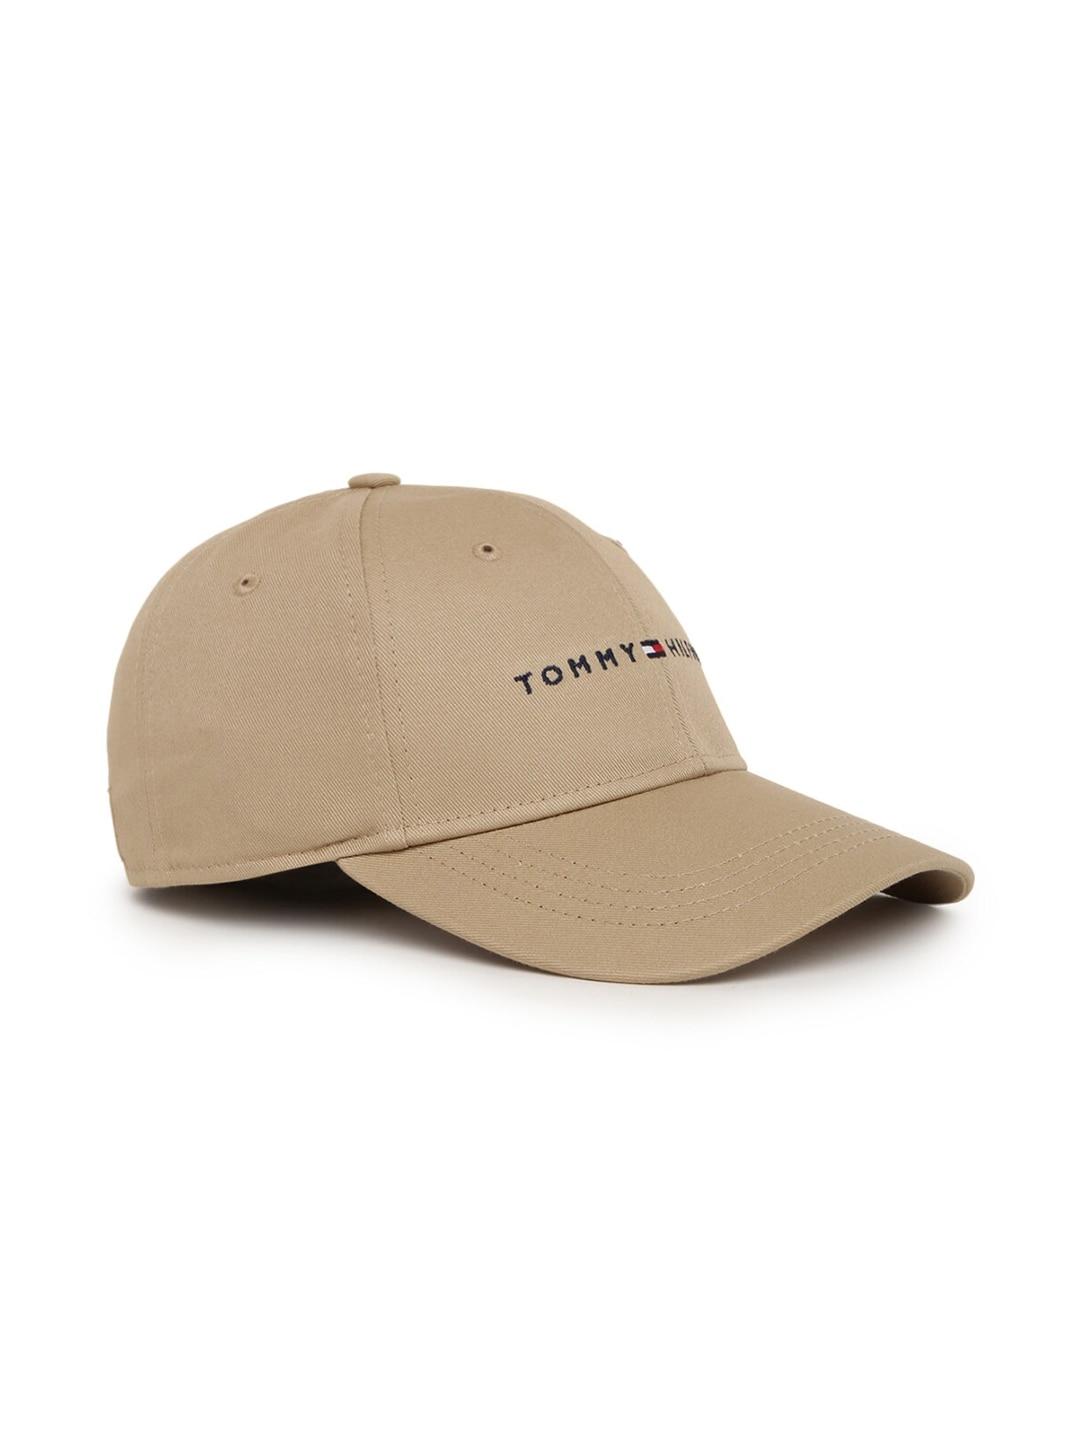 tommy-hilfiger-men-embroidered-pure-cotton-baseball-cap